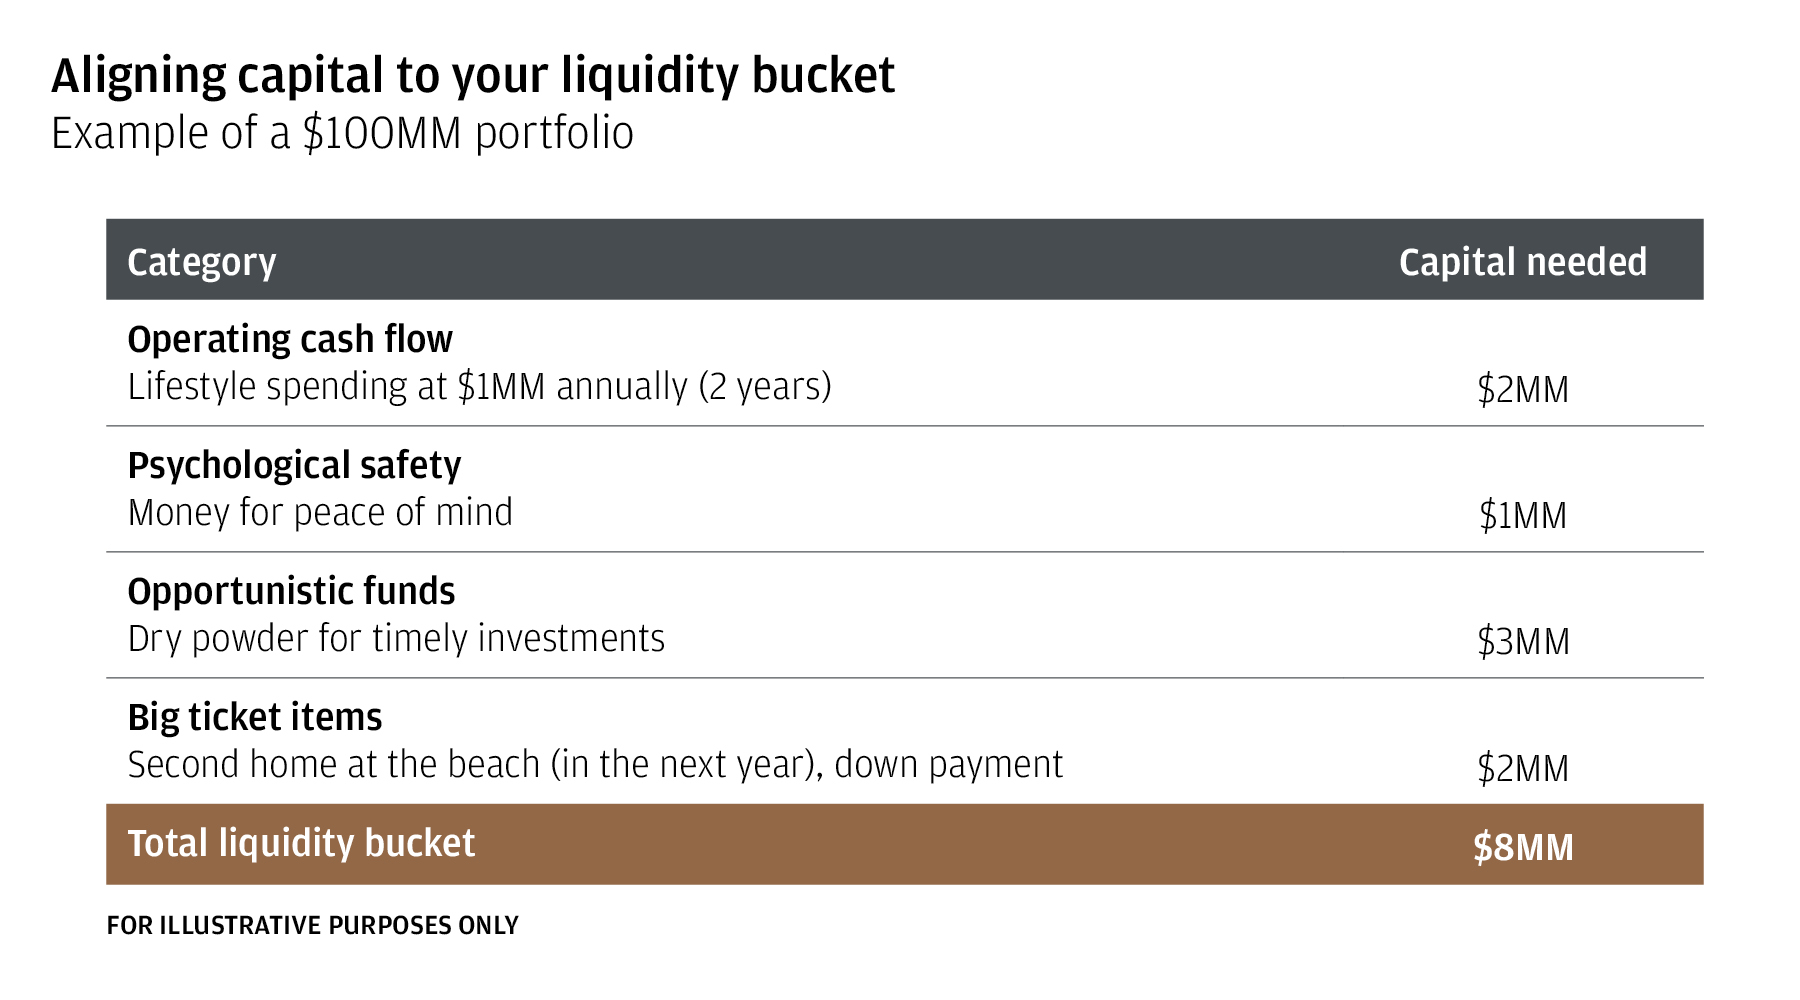 A table shows how much capital is needed for four liquidity bucket categories (operating cash flow, psychological safety net, opportunistic funds, big ticket items).